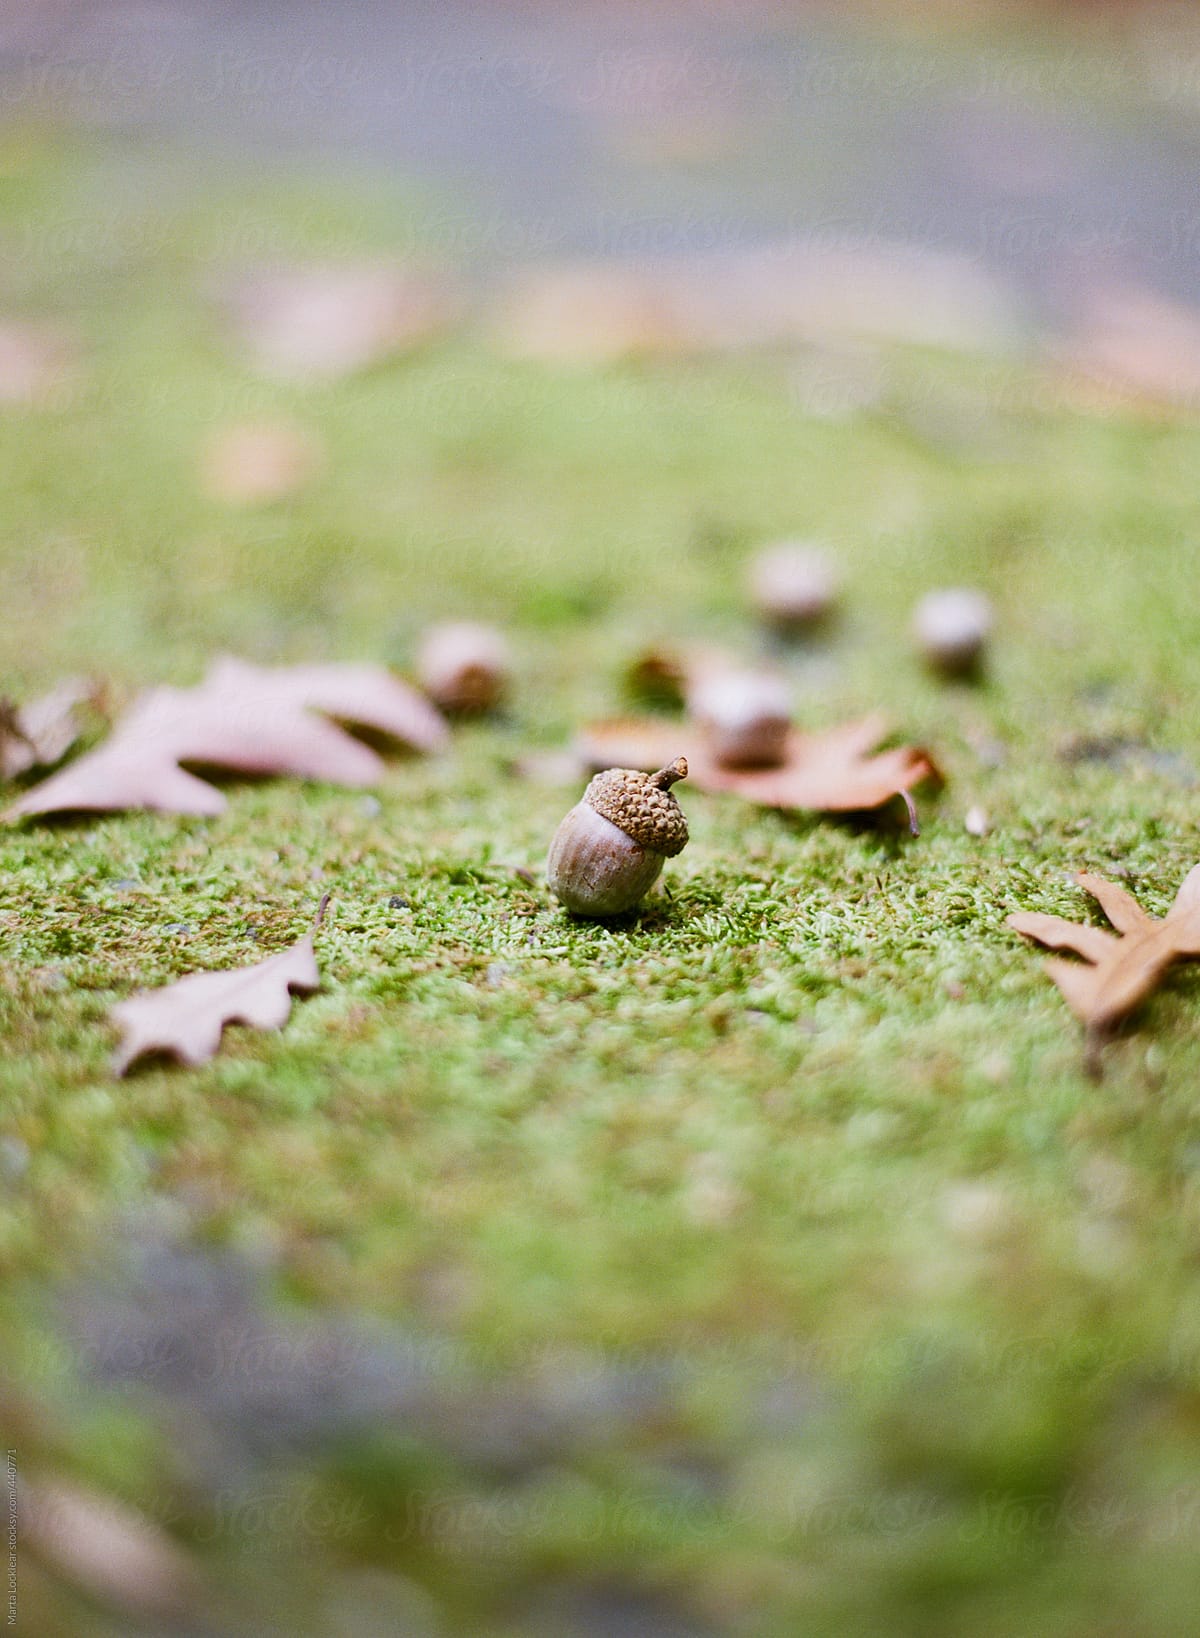 Ground level view of a fall acorn on a bed of moss